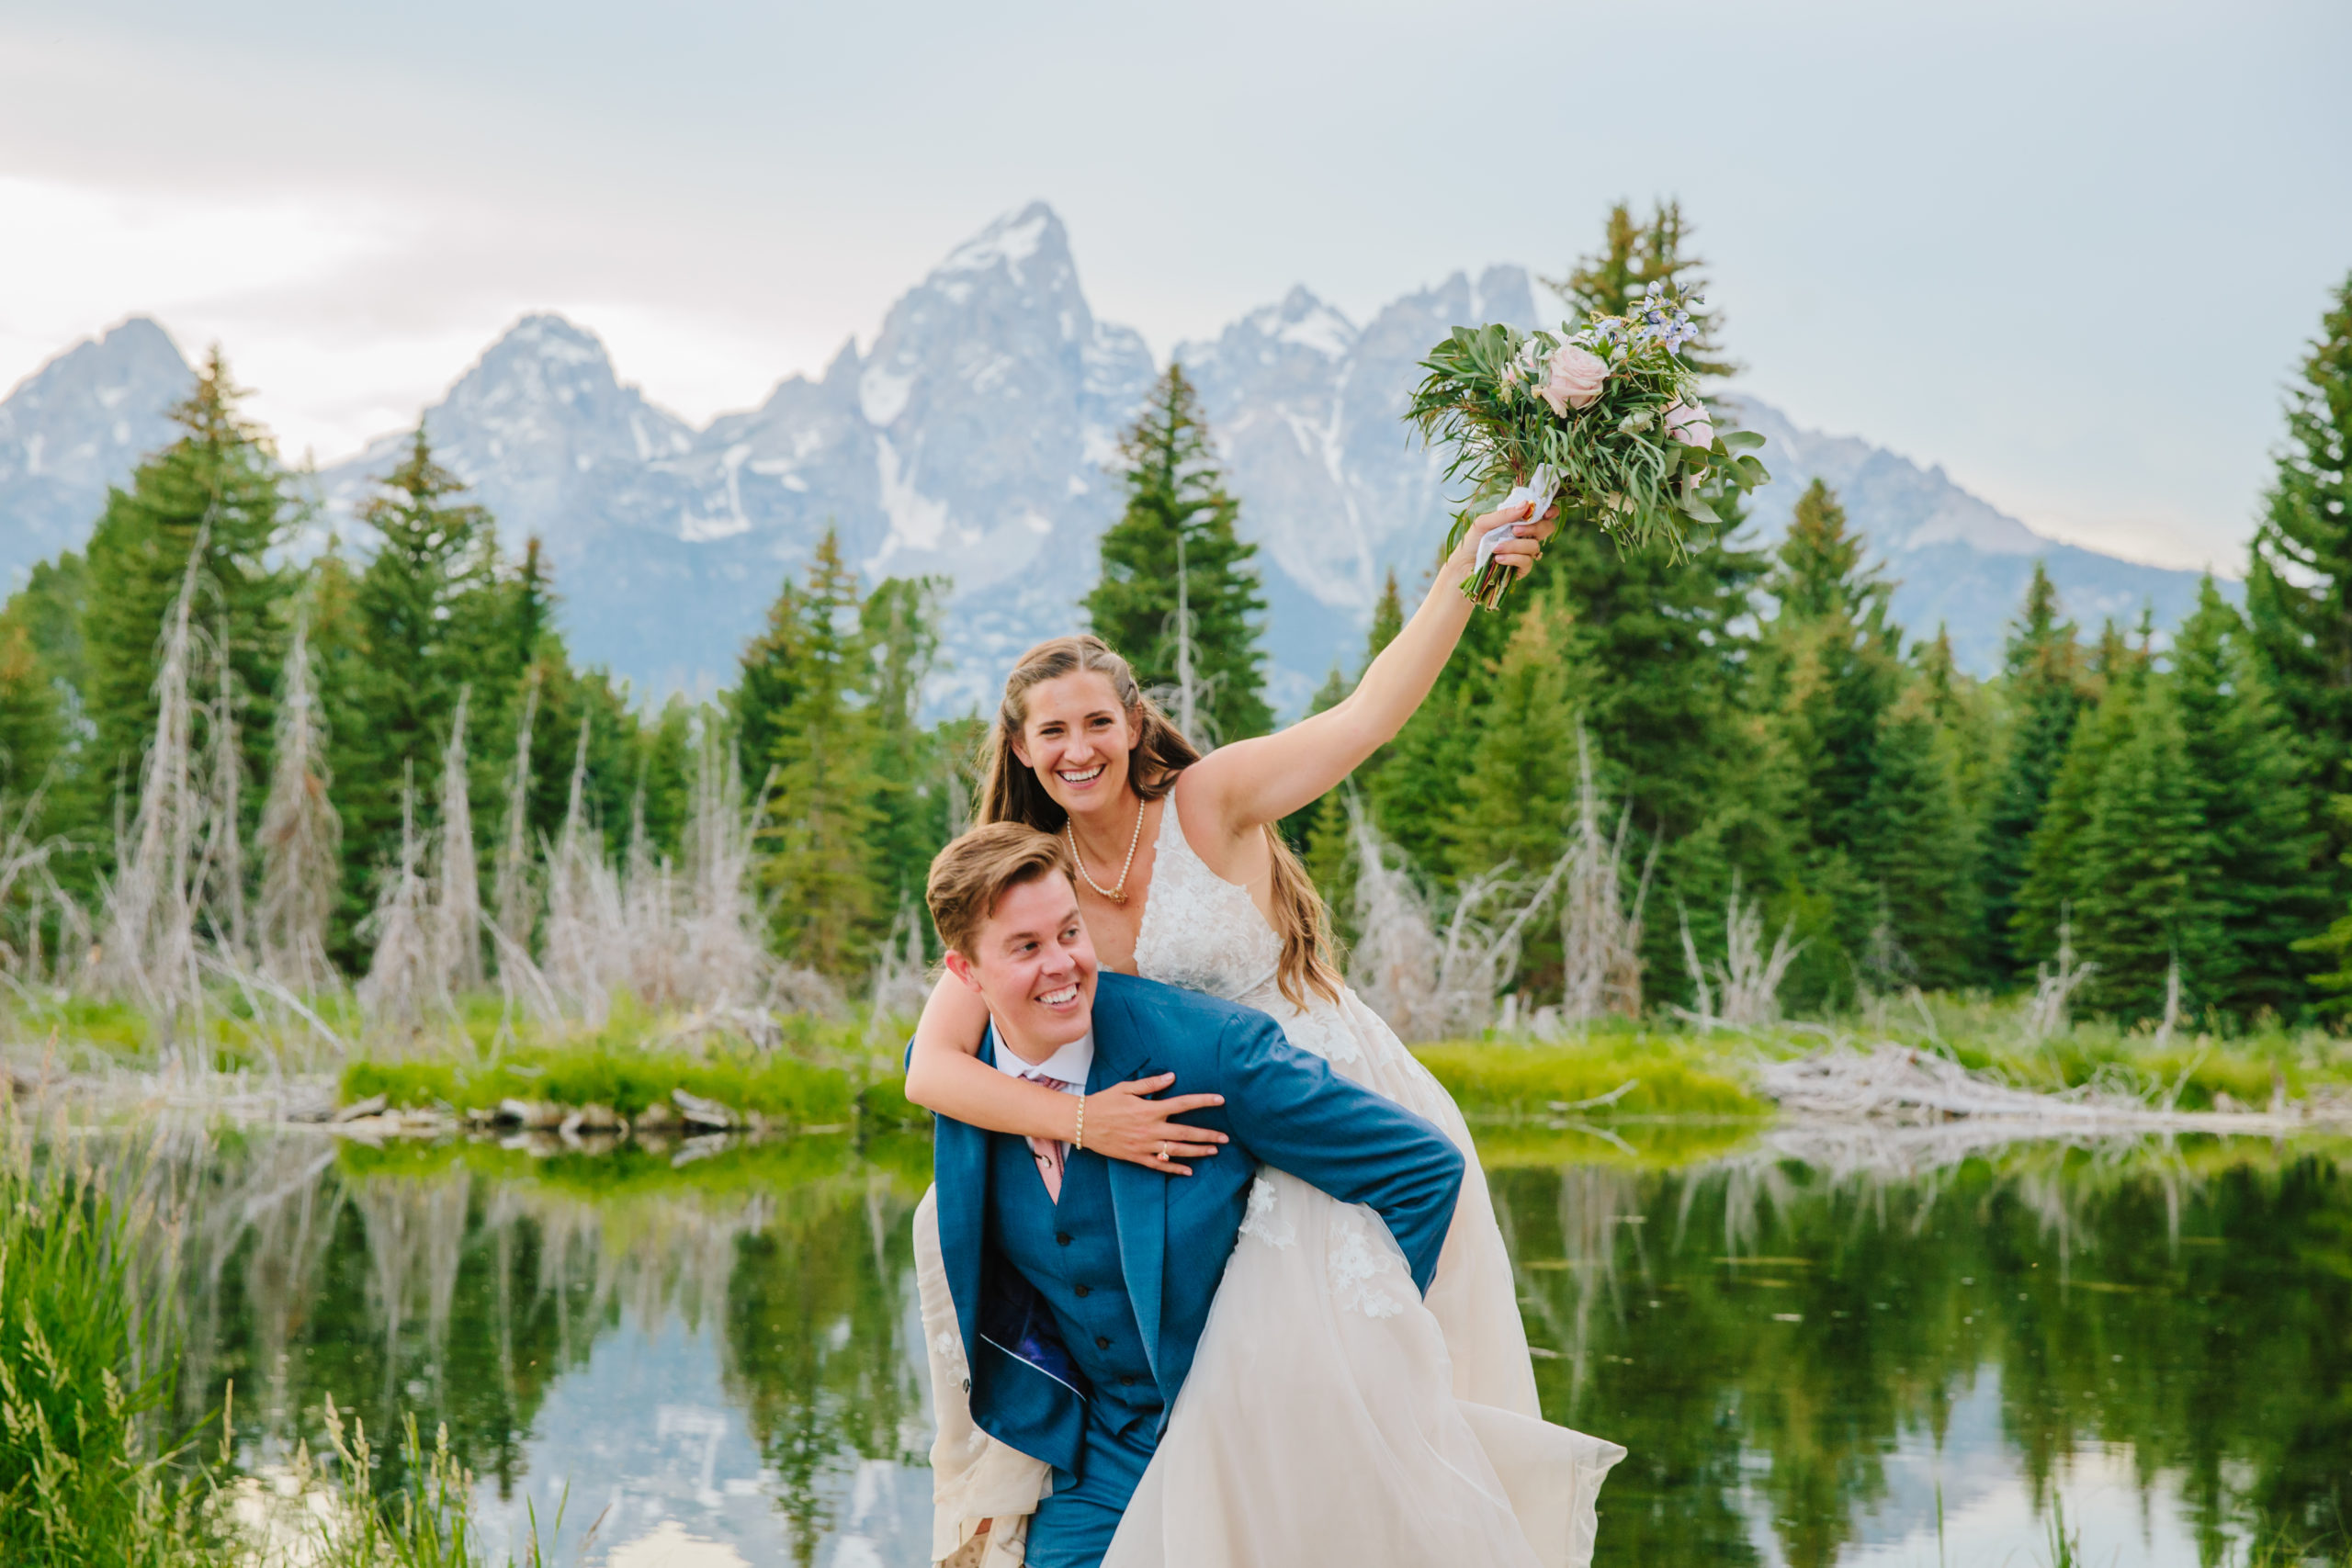 Jackson Hole wedding photographer captures groom lifting bride up on back during outdoor bridals